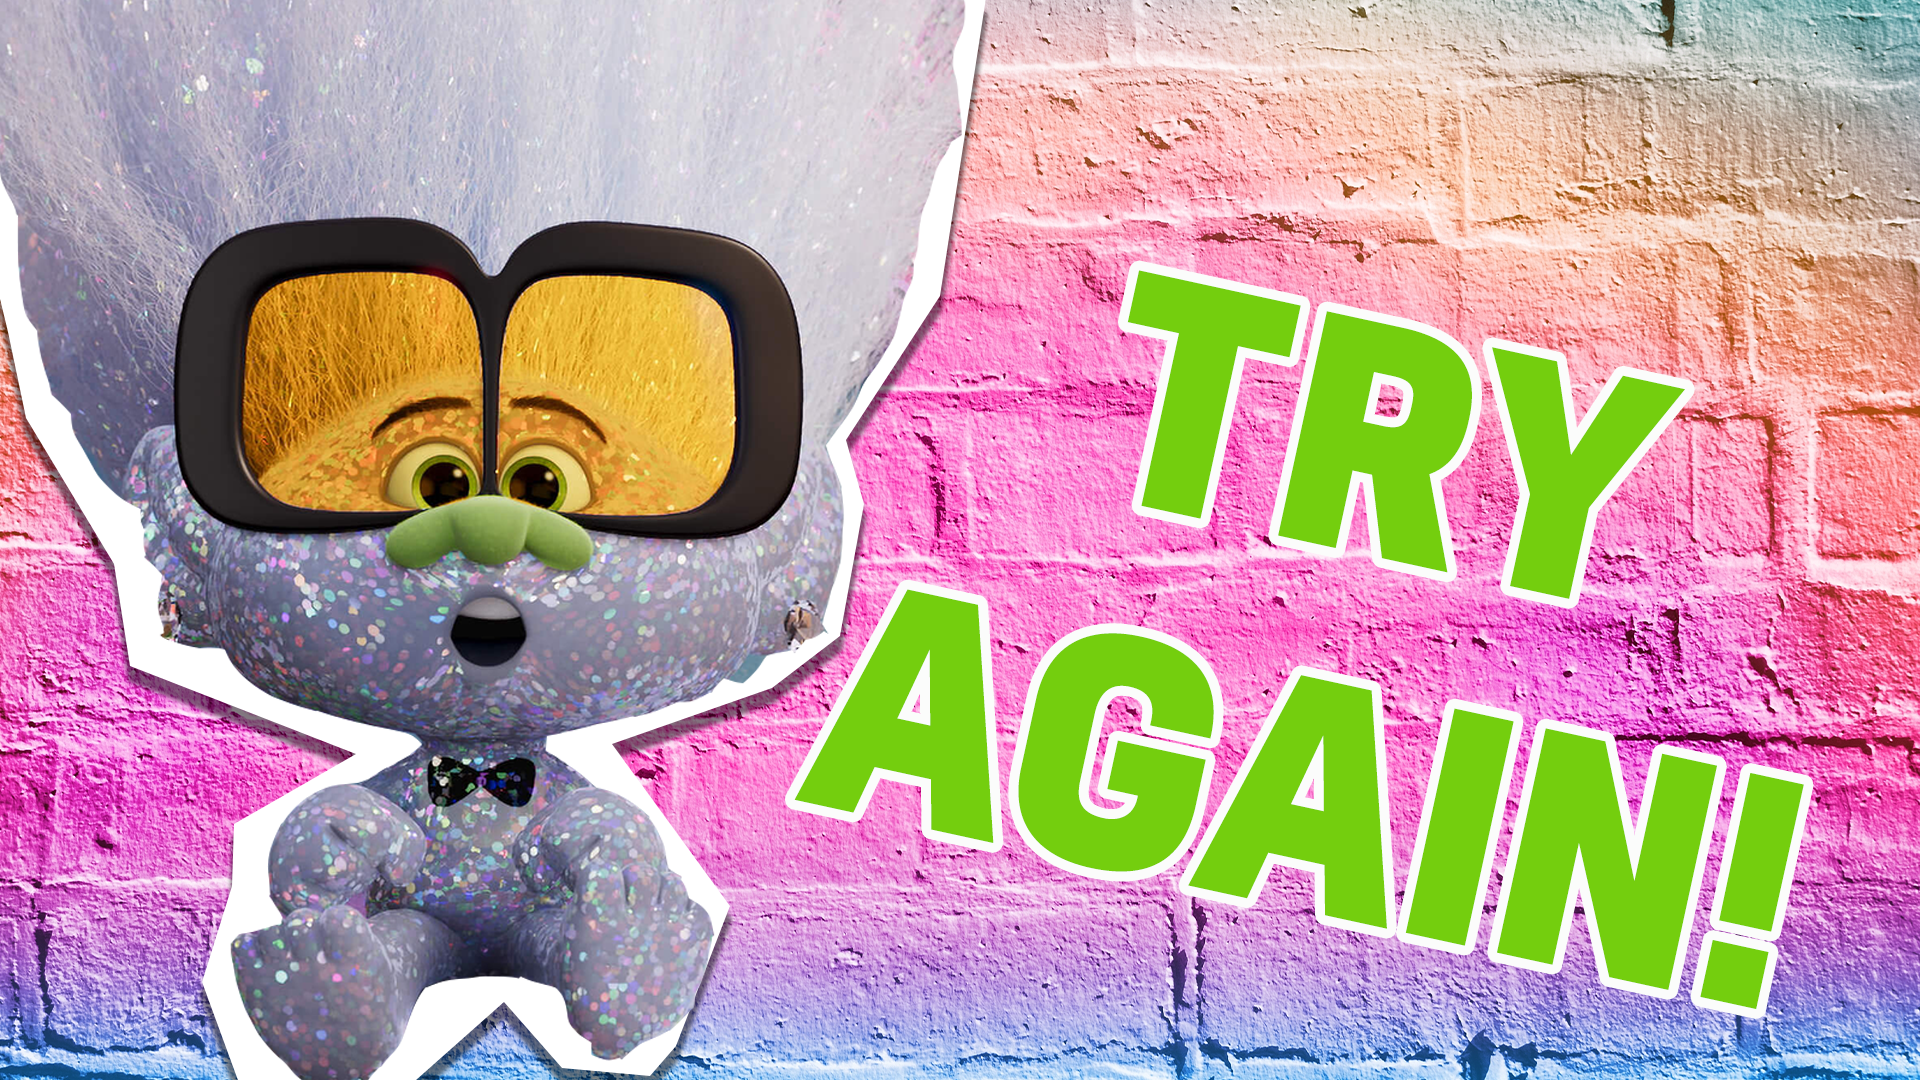 Not bad, but you can do better! Try again and see if you score higher on your Trolls trivia!